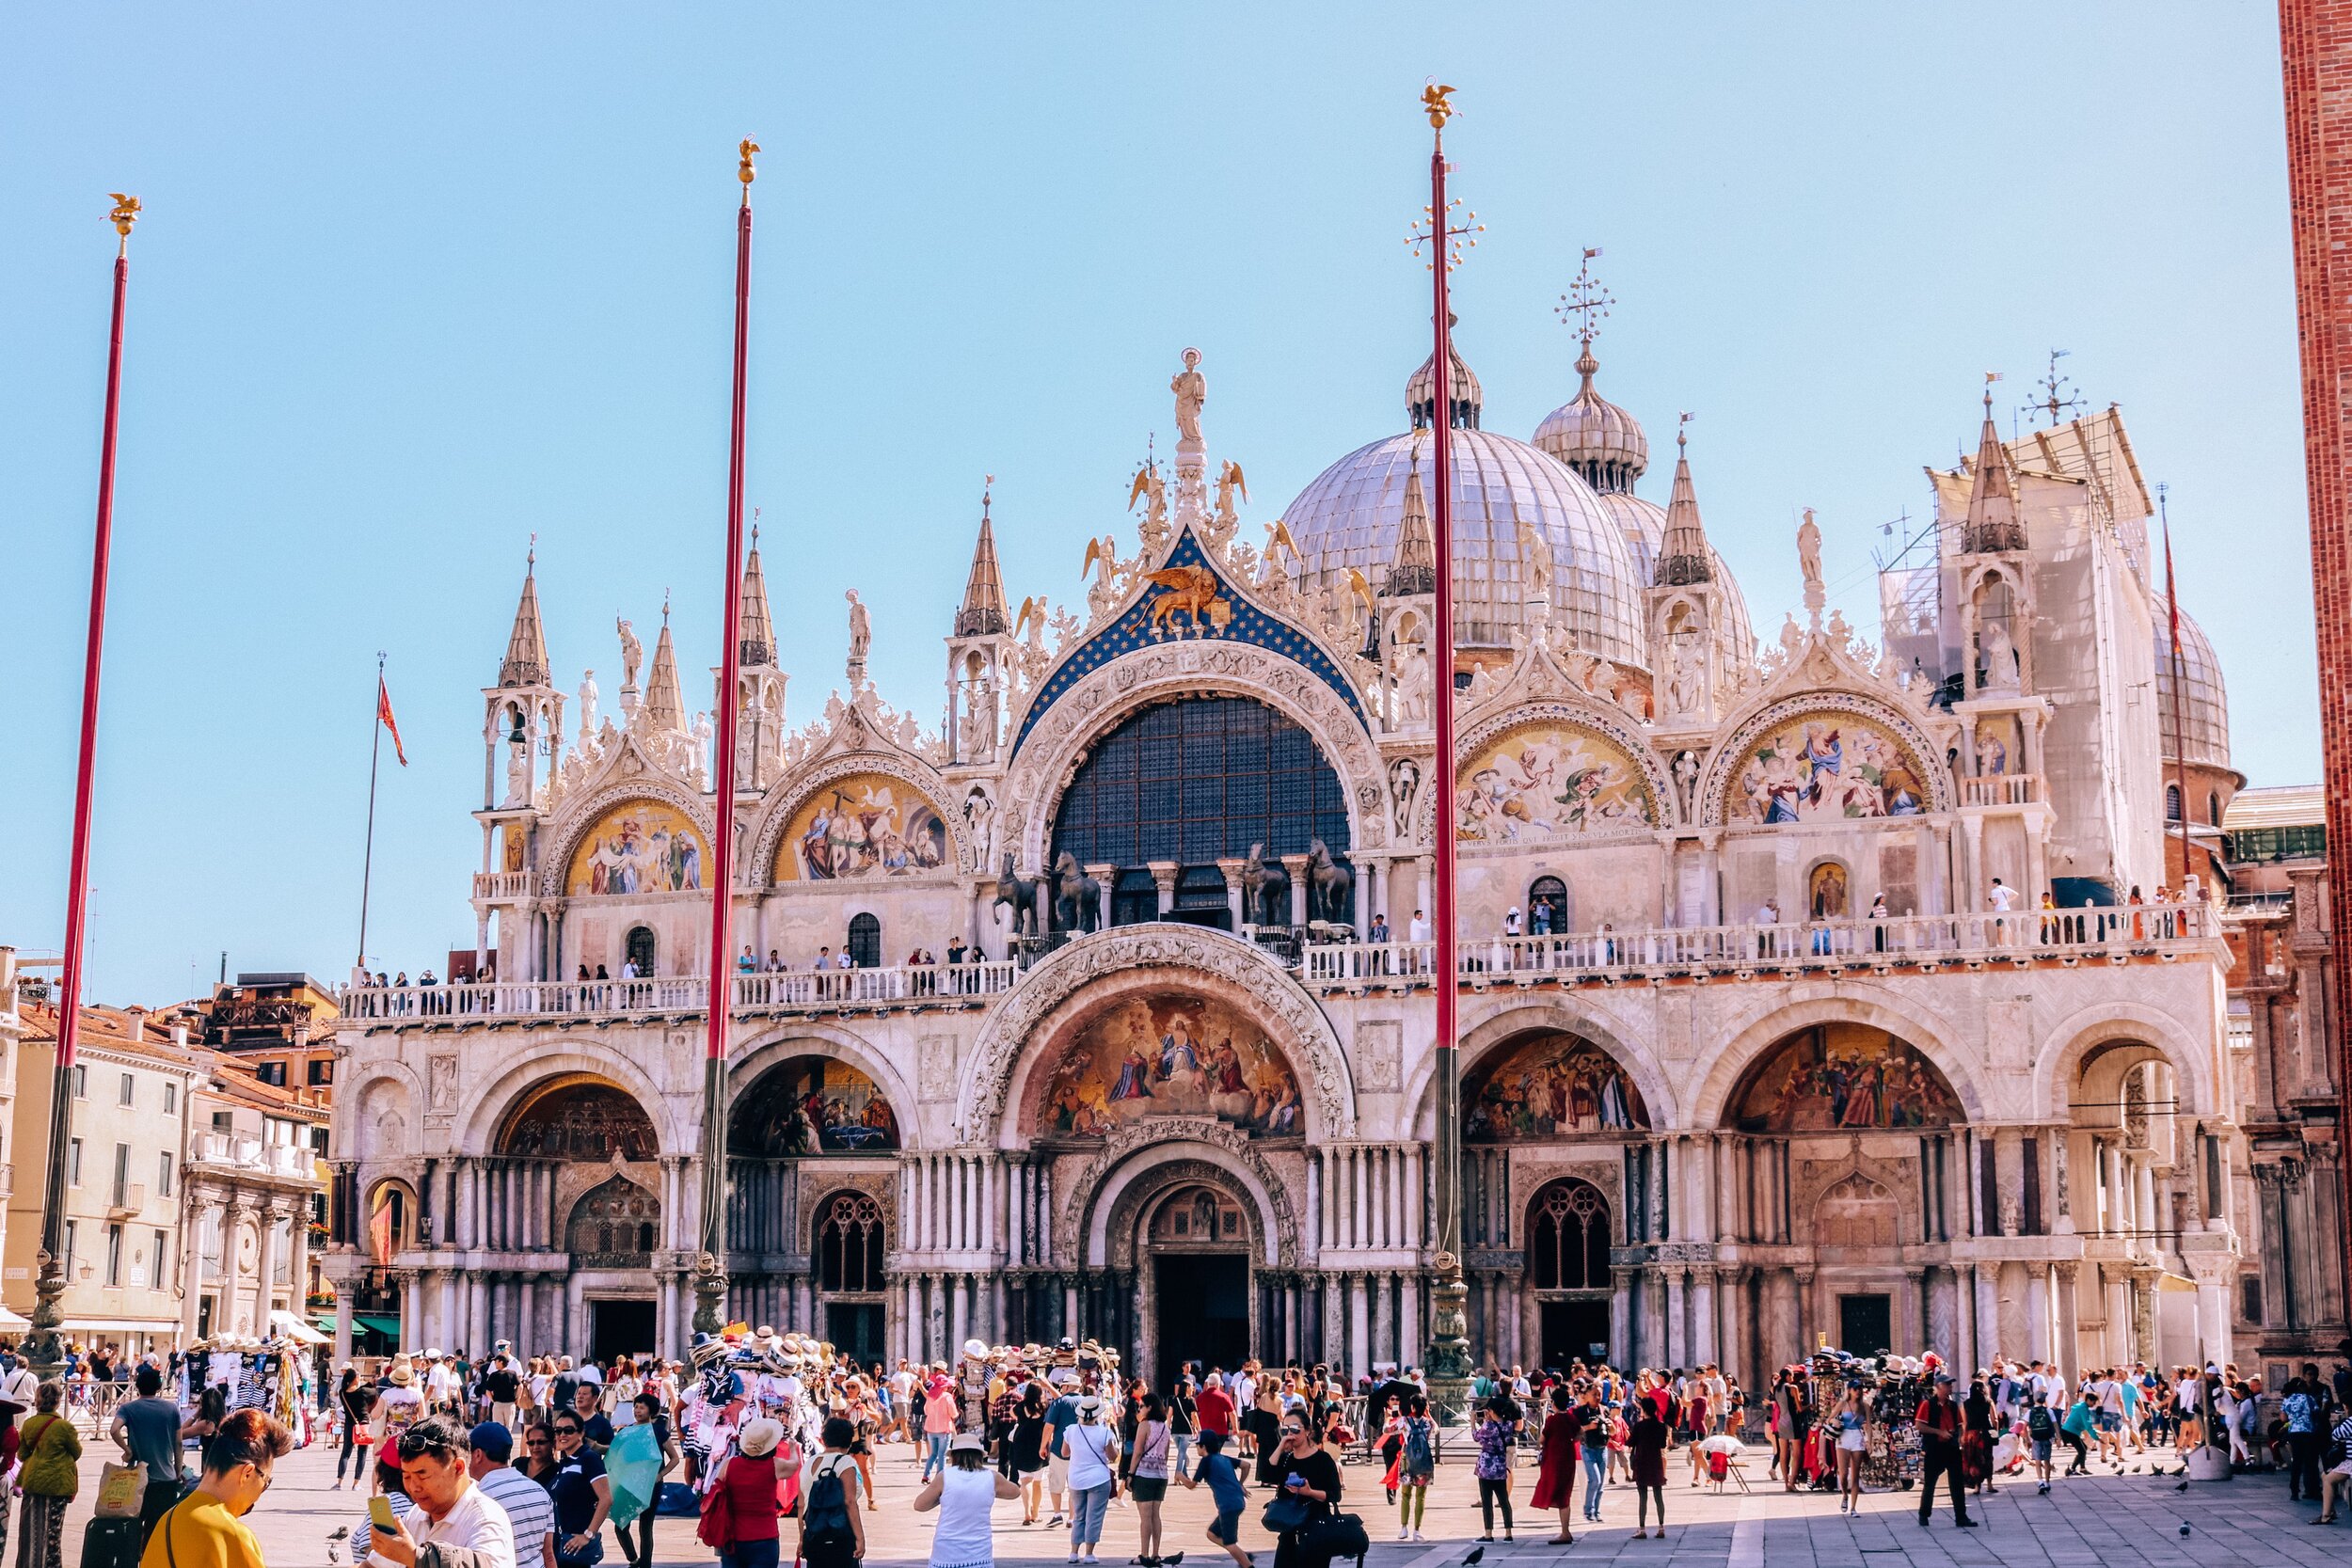 3 days in Venice - a Venice itinerary for peak summer season to avoid the crowds